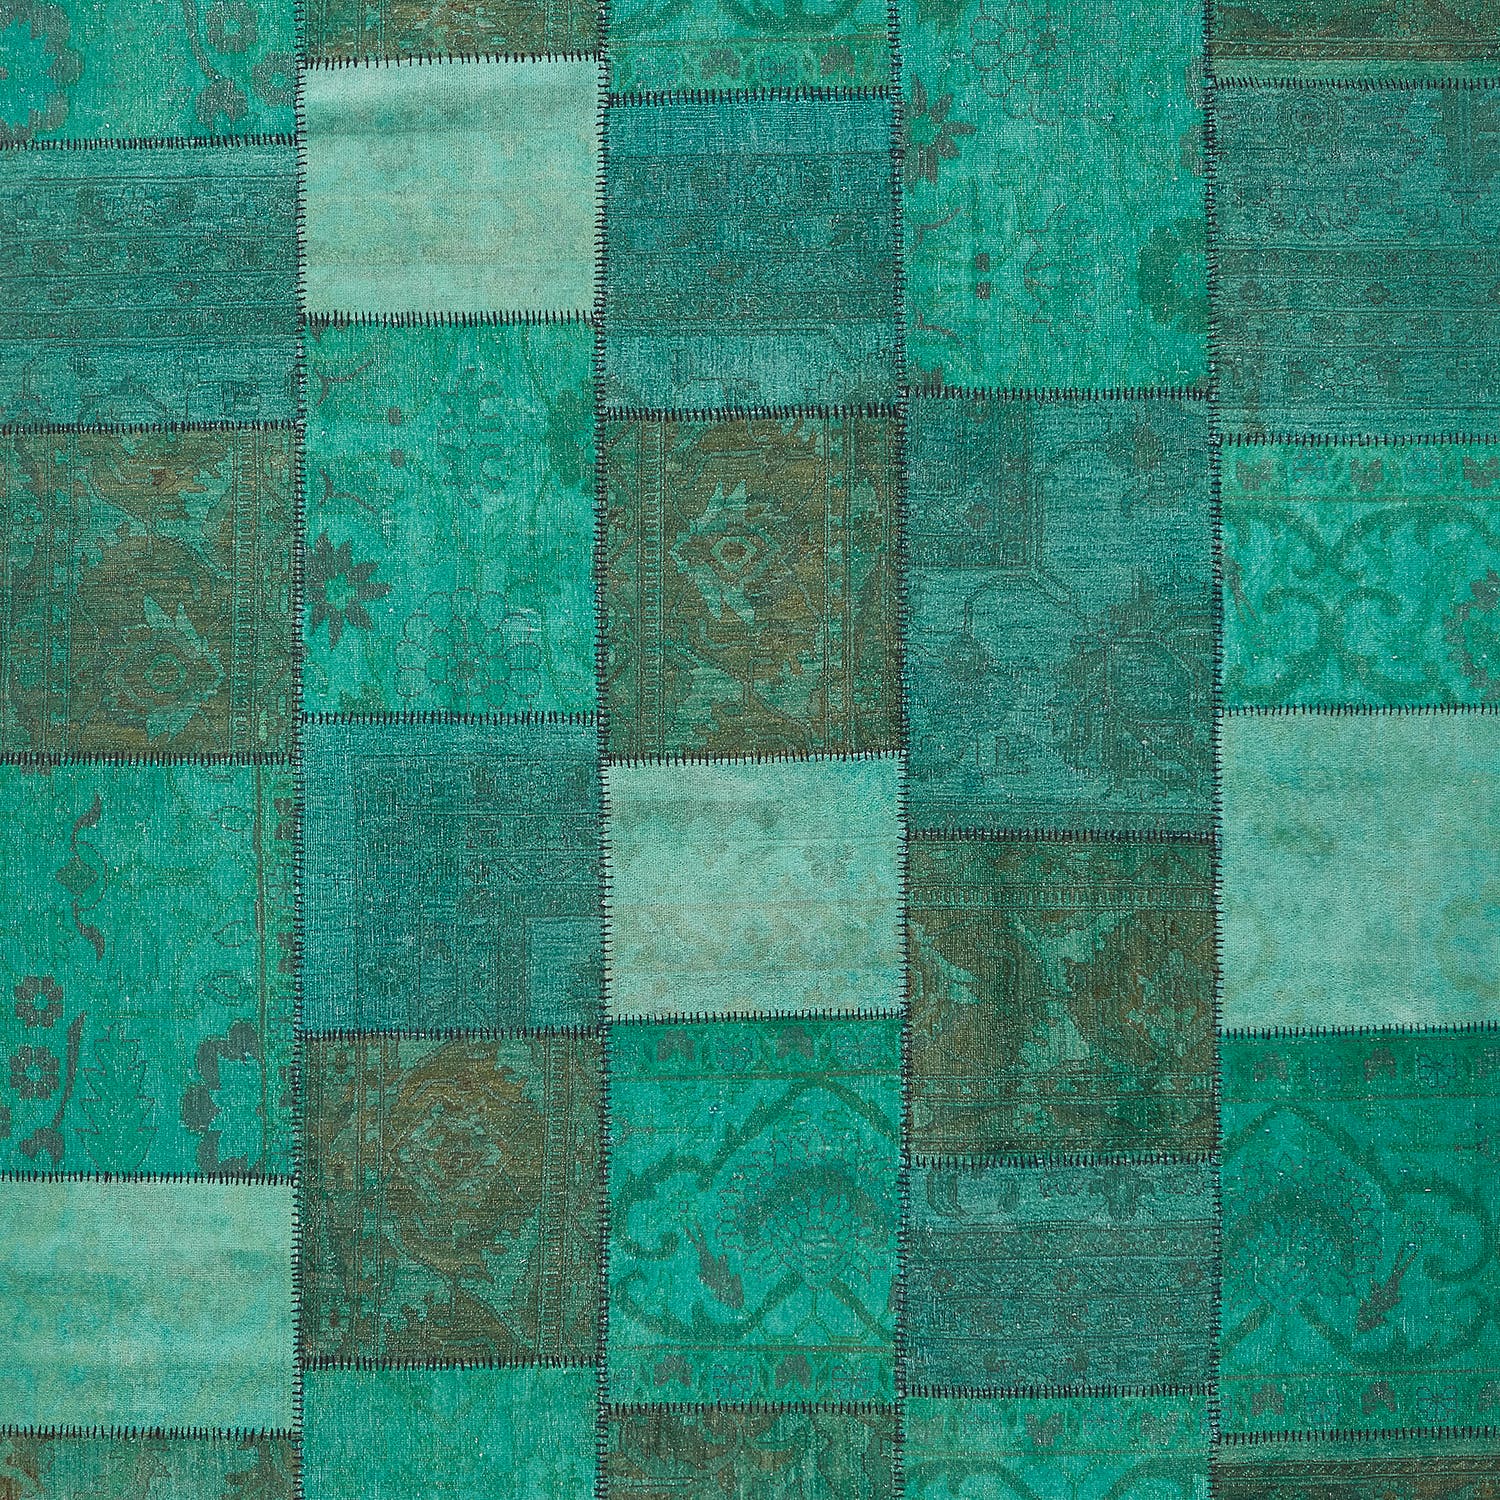 Vintage teal fabric patchwork showcases intricate designs and distressed textures.